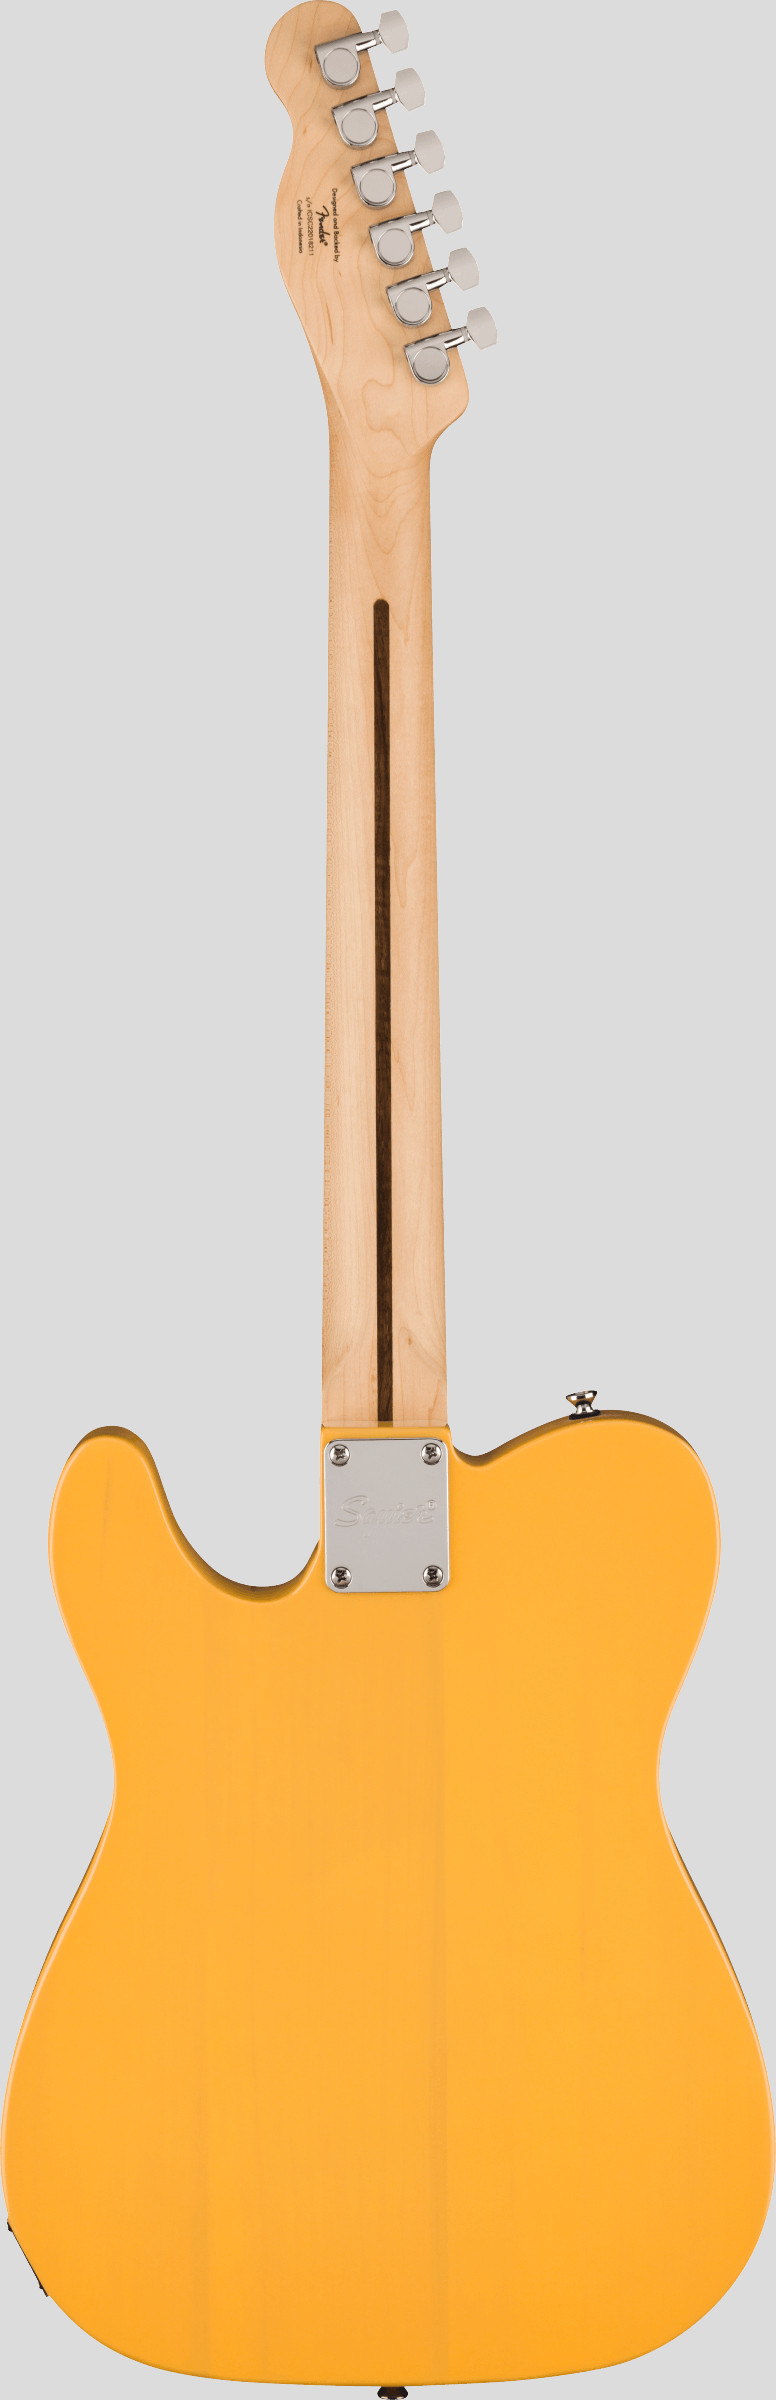 Squier by Fender Sonic Telecaster Butterscotch Blonde 2